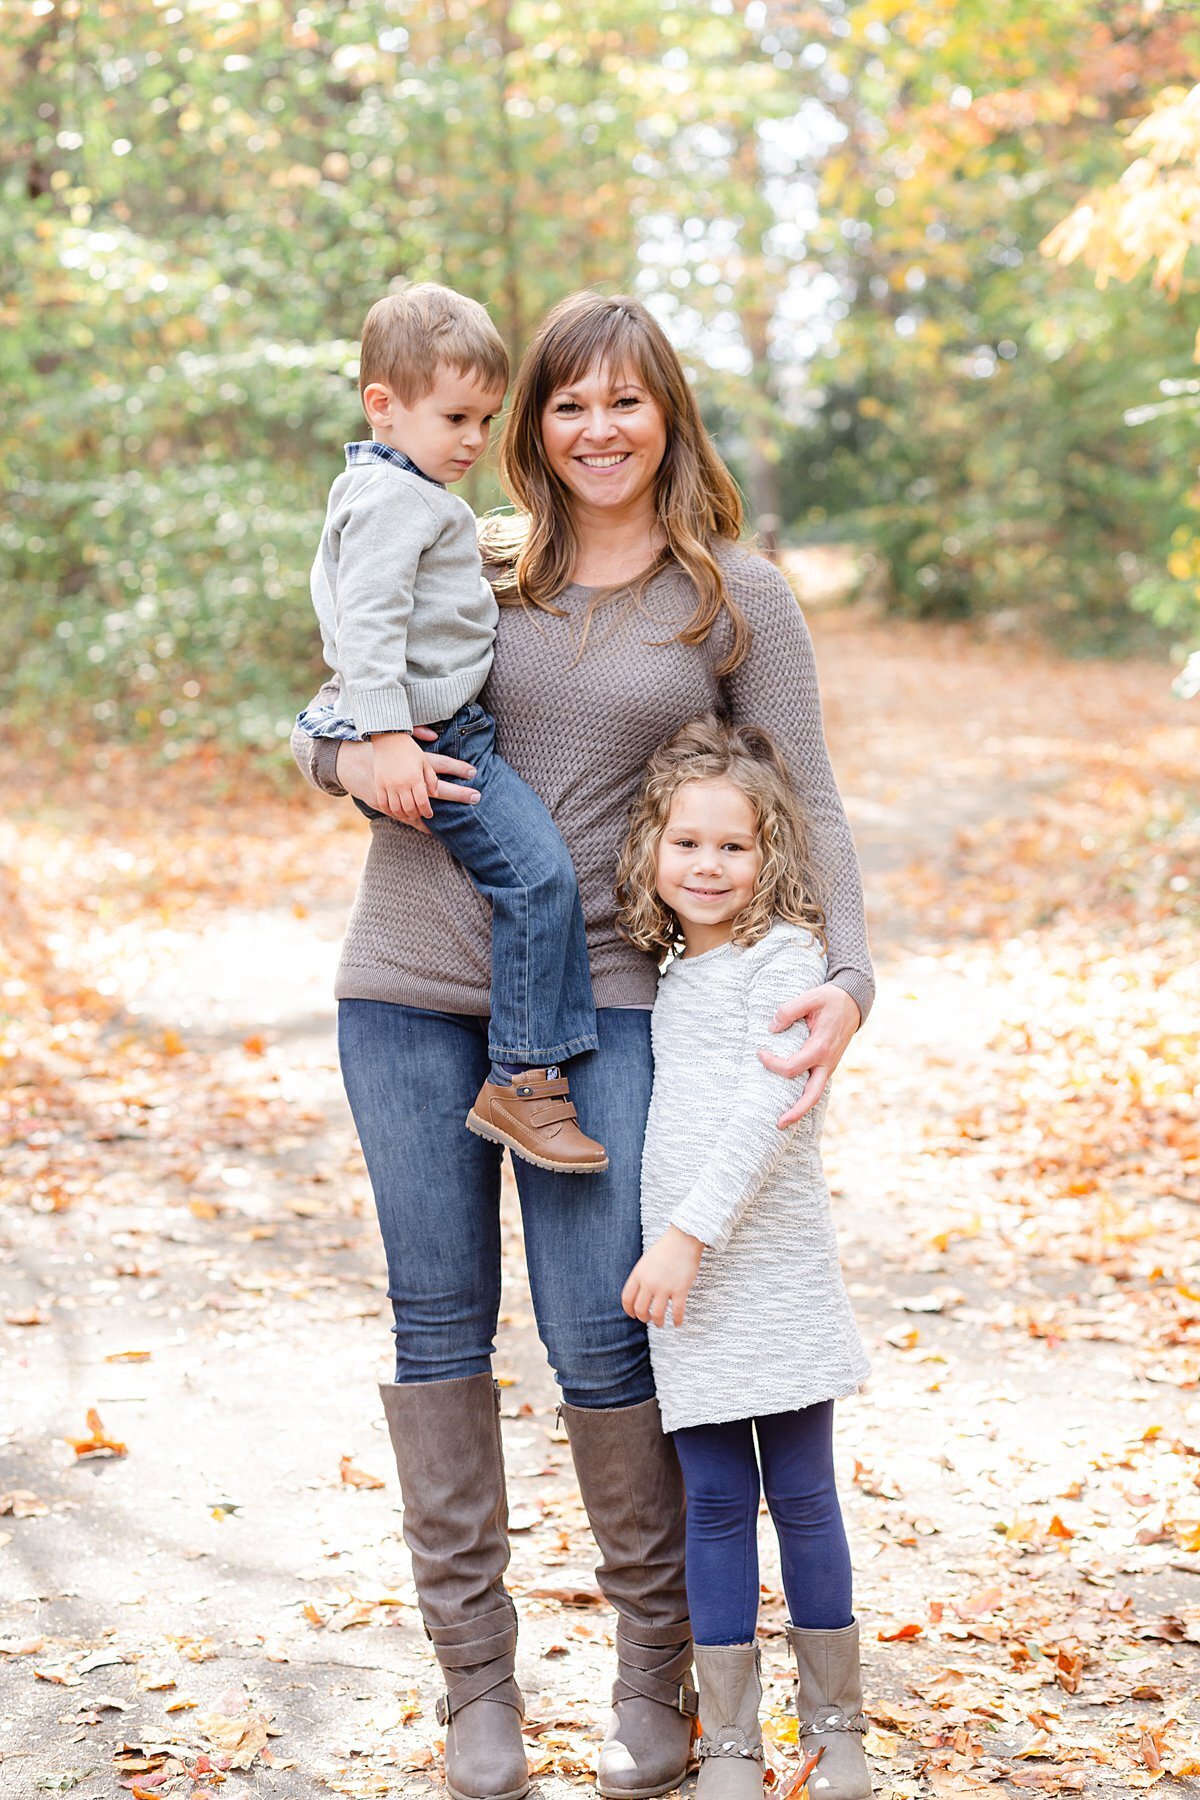 outdoor-fall-mini-sessions-cleveland-park-greenville-sc-8